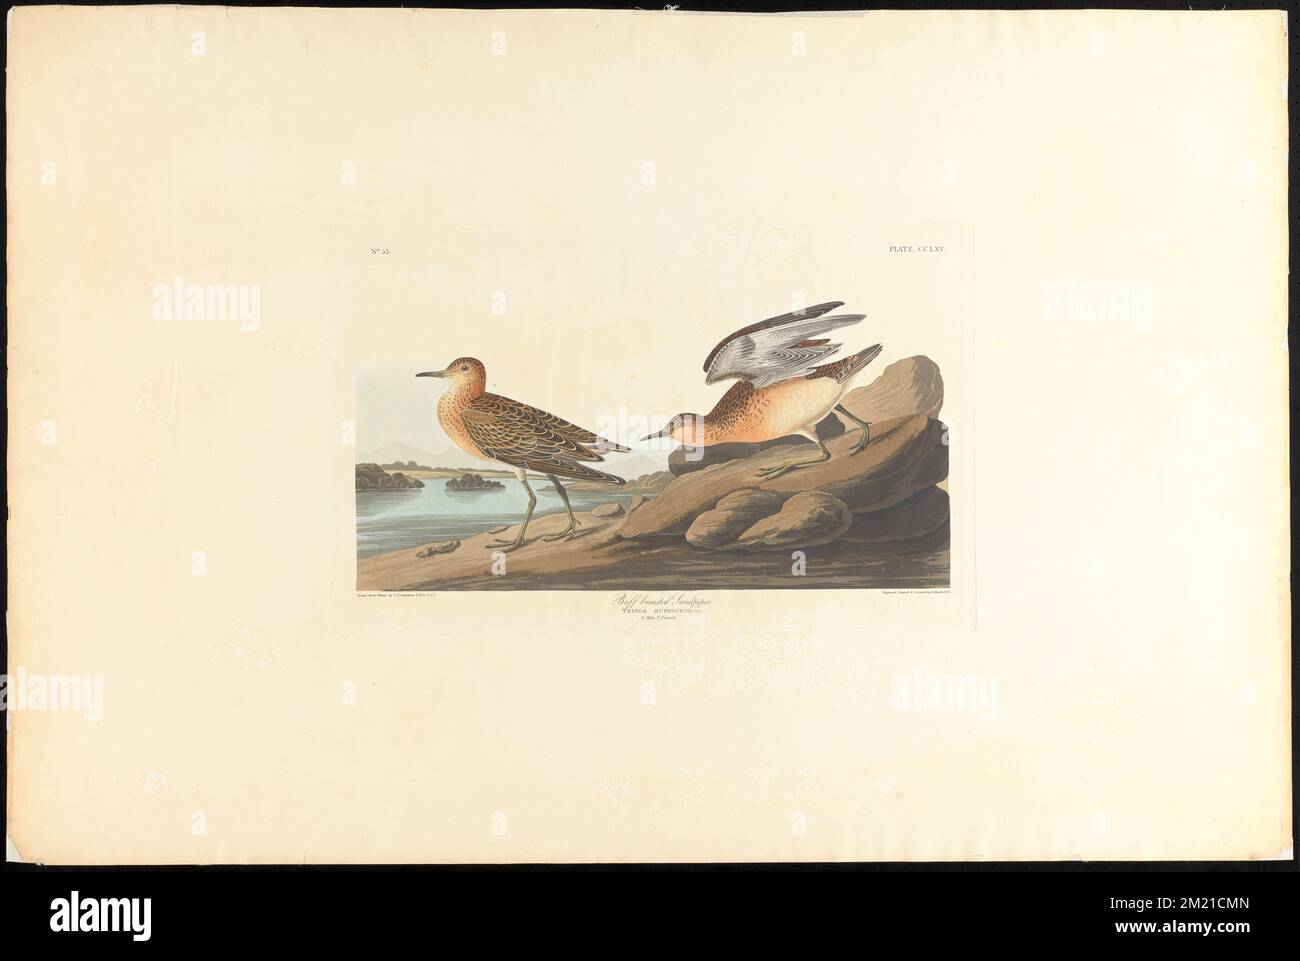 Buff breasted sandpiper : Tringa rufescens, Viell. 1. Male. 2. Female , Sandpipers, Tryngites subruficollis. The Birds of America- From Original Drawings by John James Audubon Stock Photo